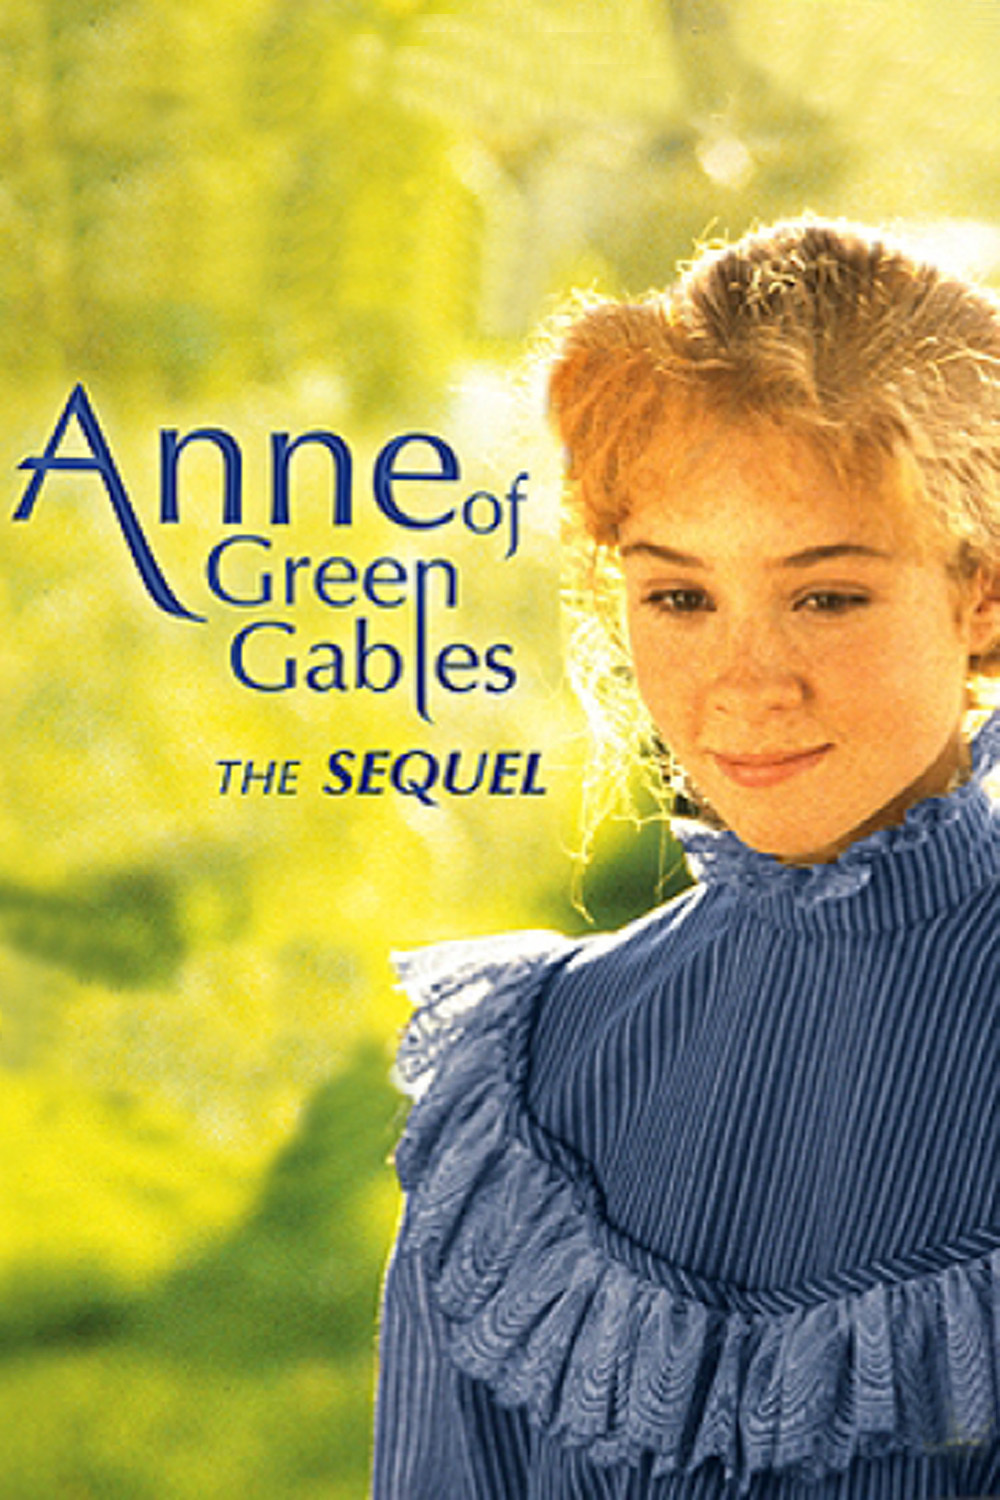 what year is anne of green gables 1987 setting